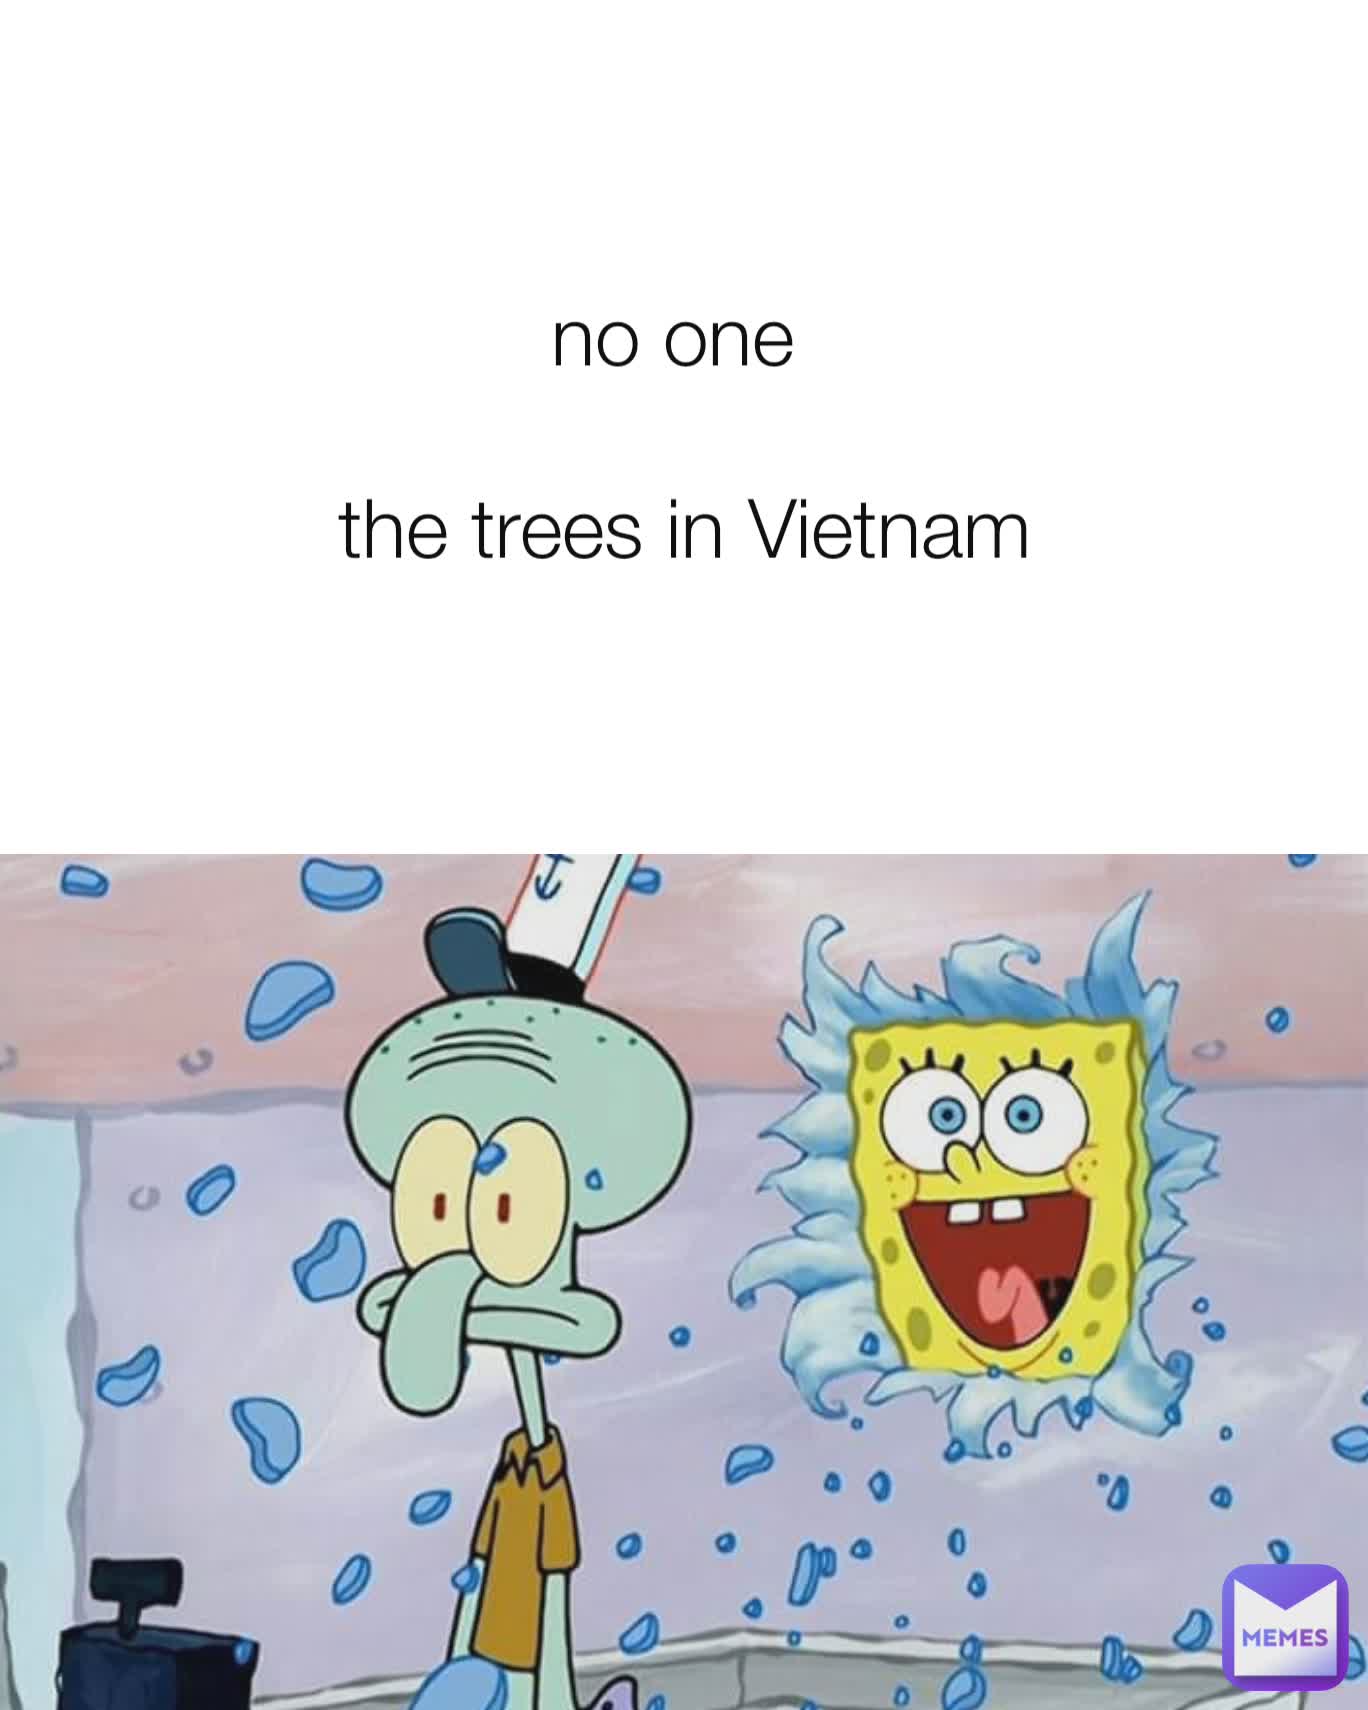 no one 

the trees in Vietnam